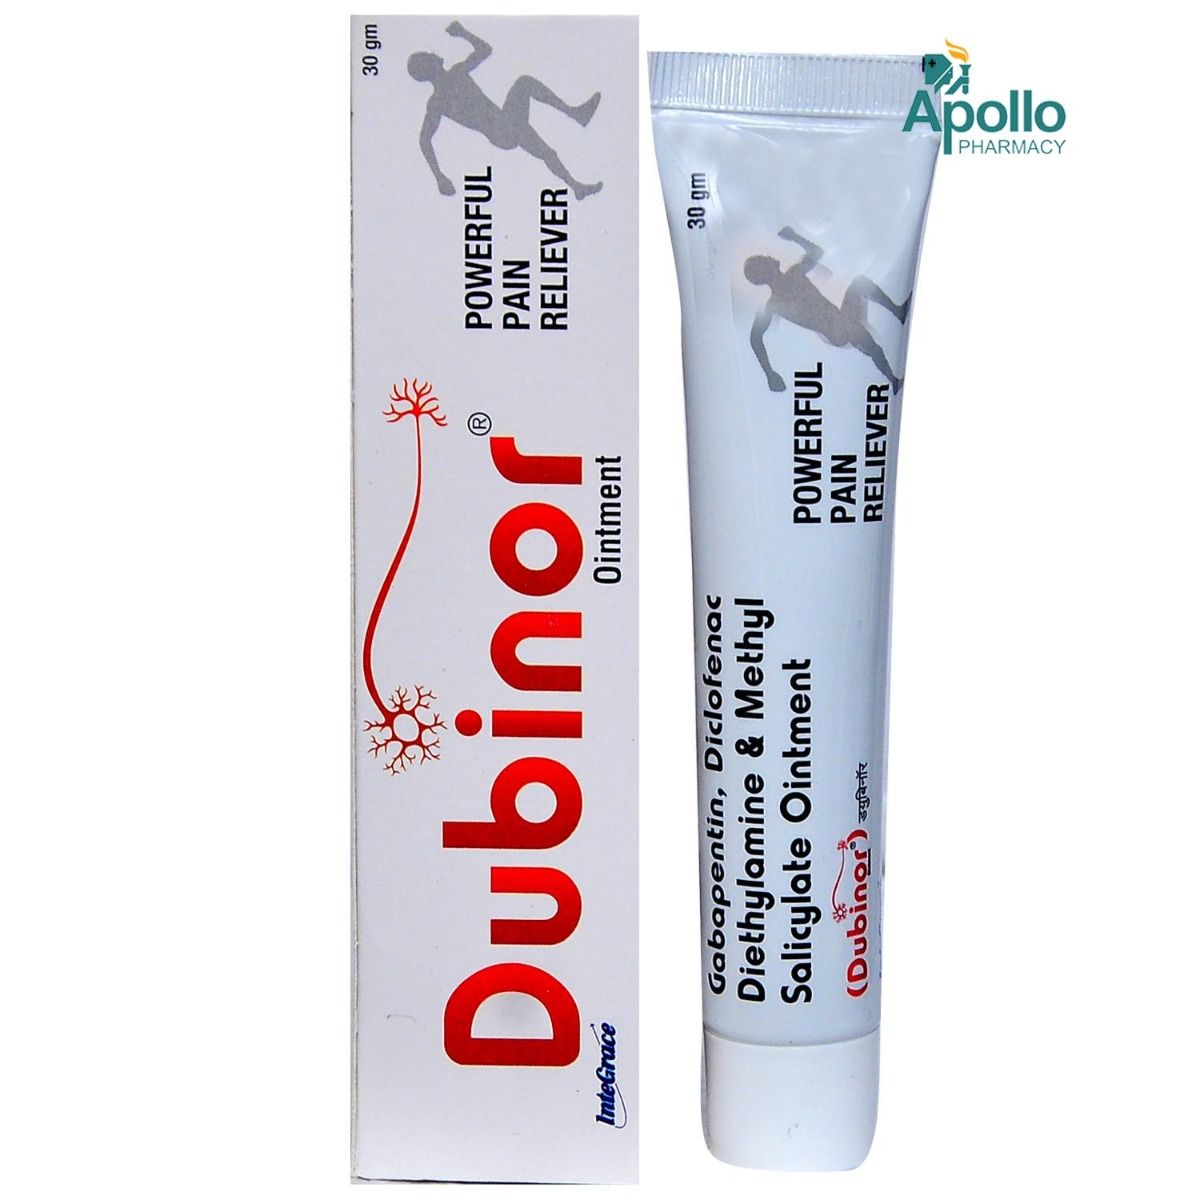 Dubinor Ointment 30 gm, Pack of 1 OINTMENT